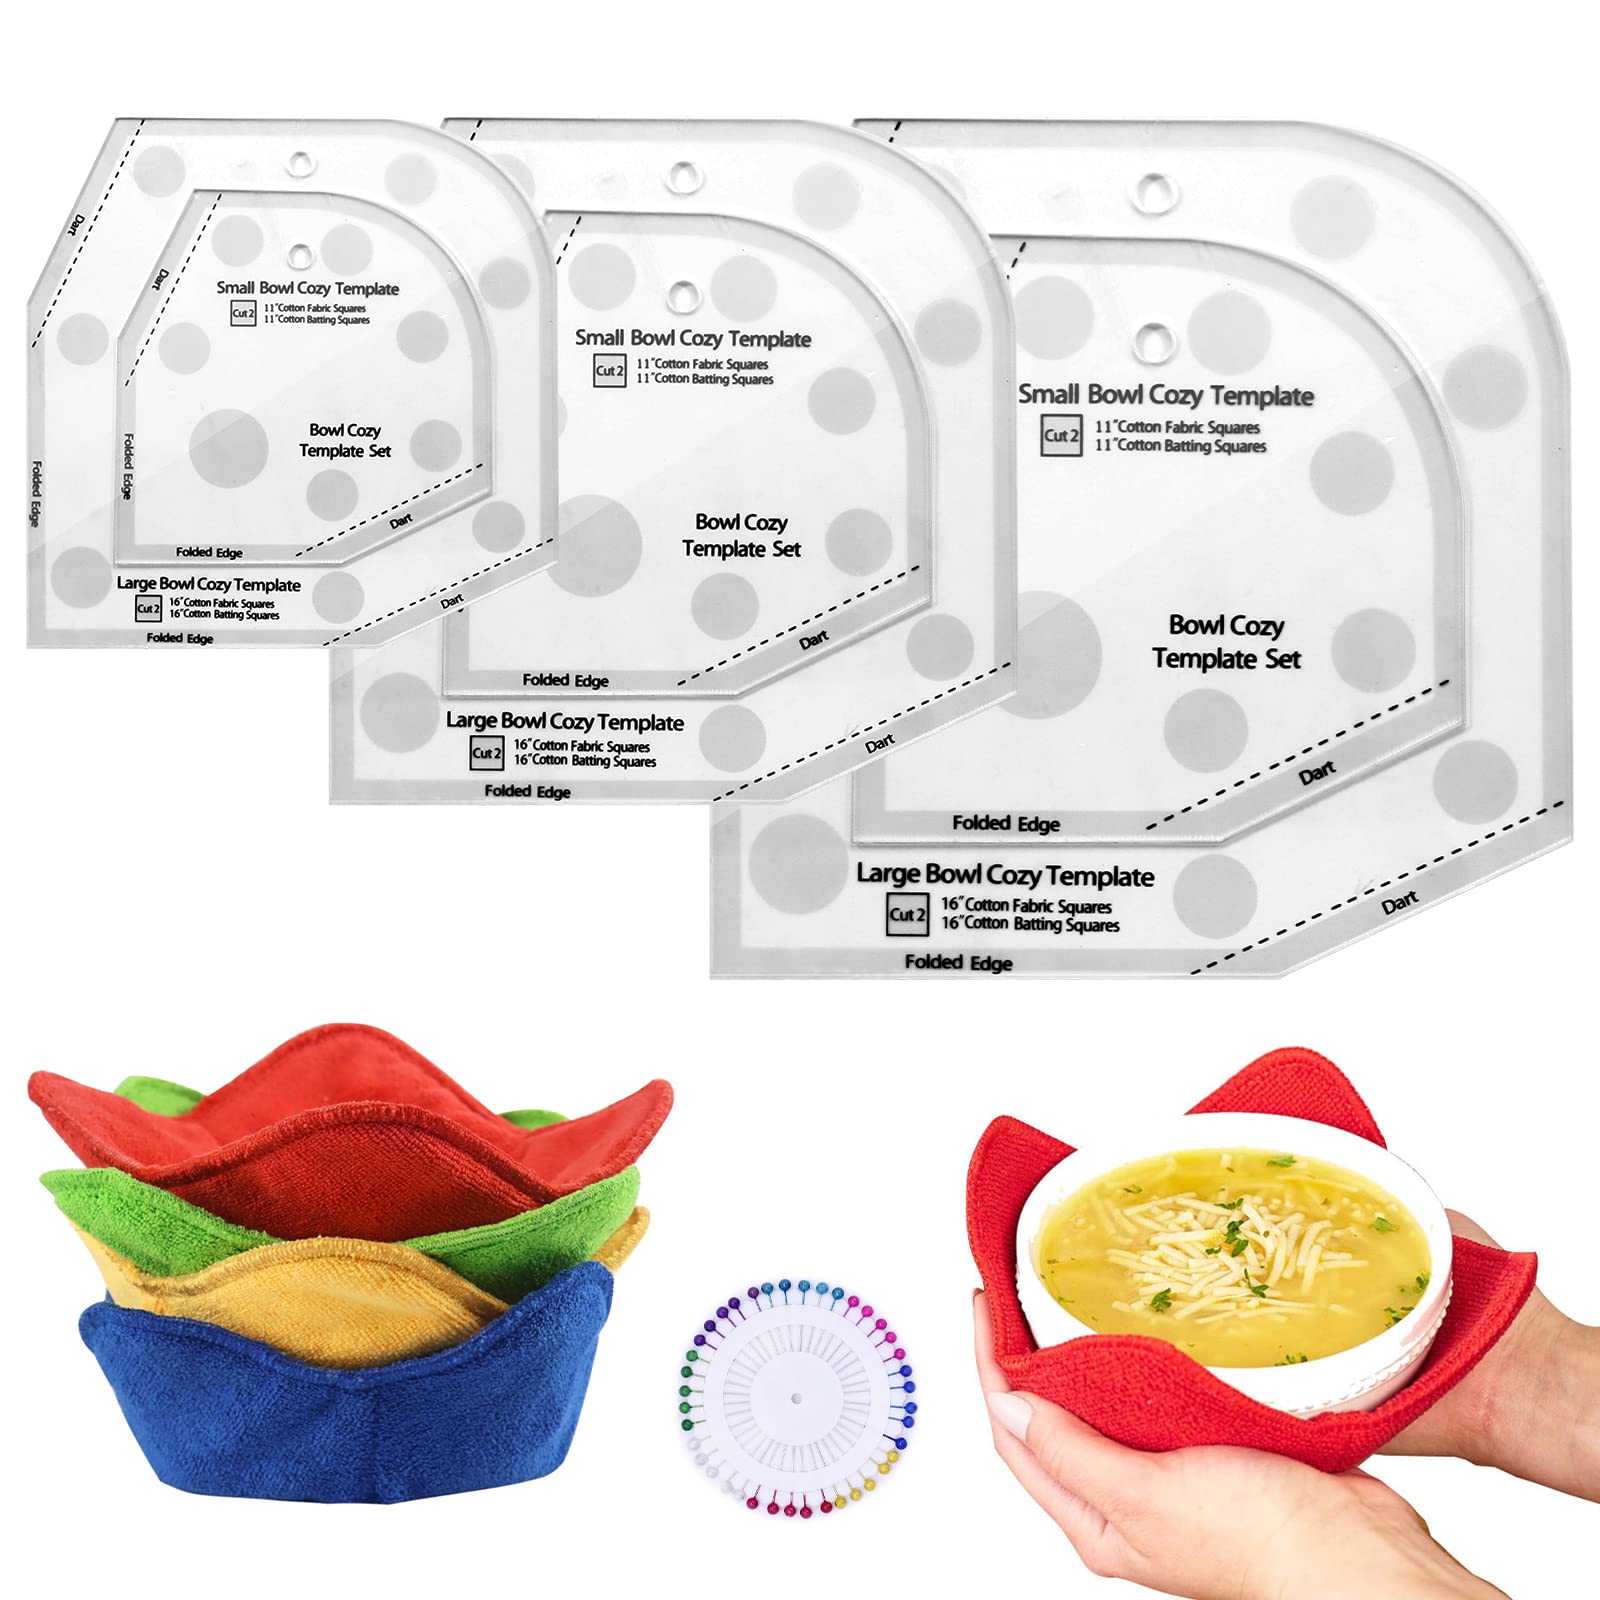  3pcs Bowl Wrap Sewing Template,3 Sizes 6in 8in 10in Quilting  Acrylic Bowl Wrap Sewing Pattern Template Acrylic Bowl Cozy Template for  DIY Kitchen Sewing : Arts, Crafts & Sewing